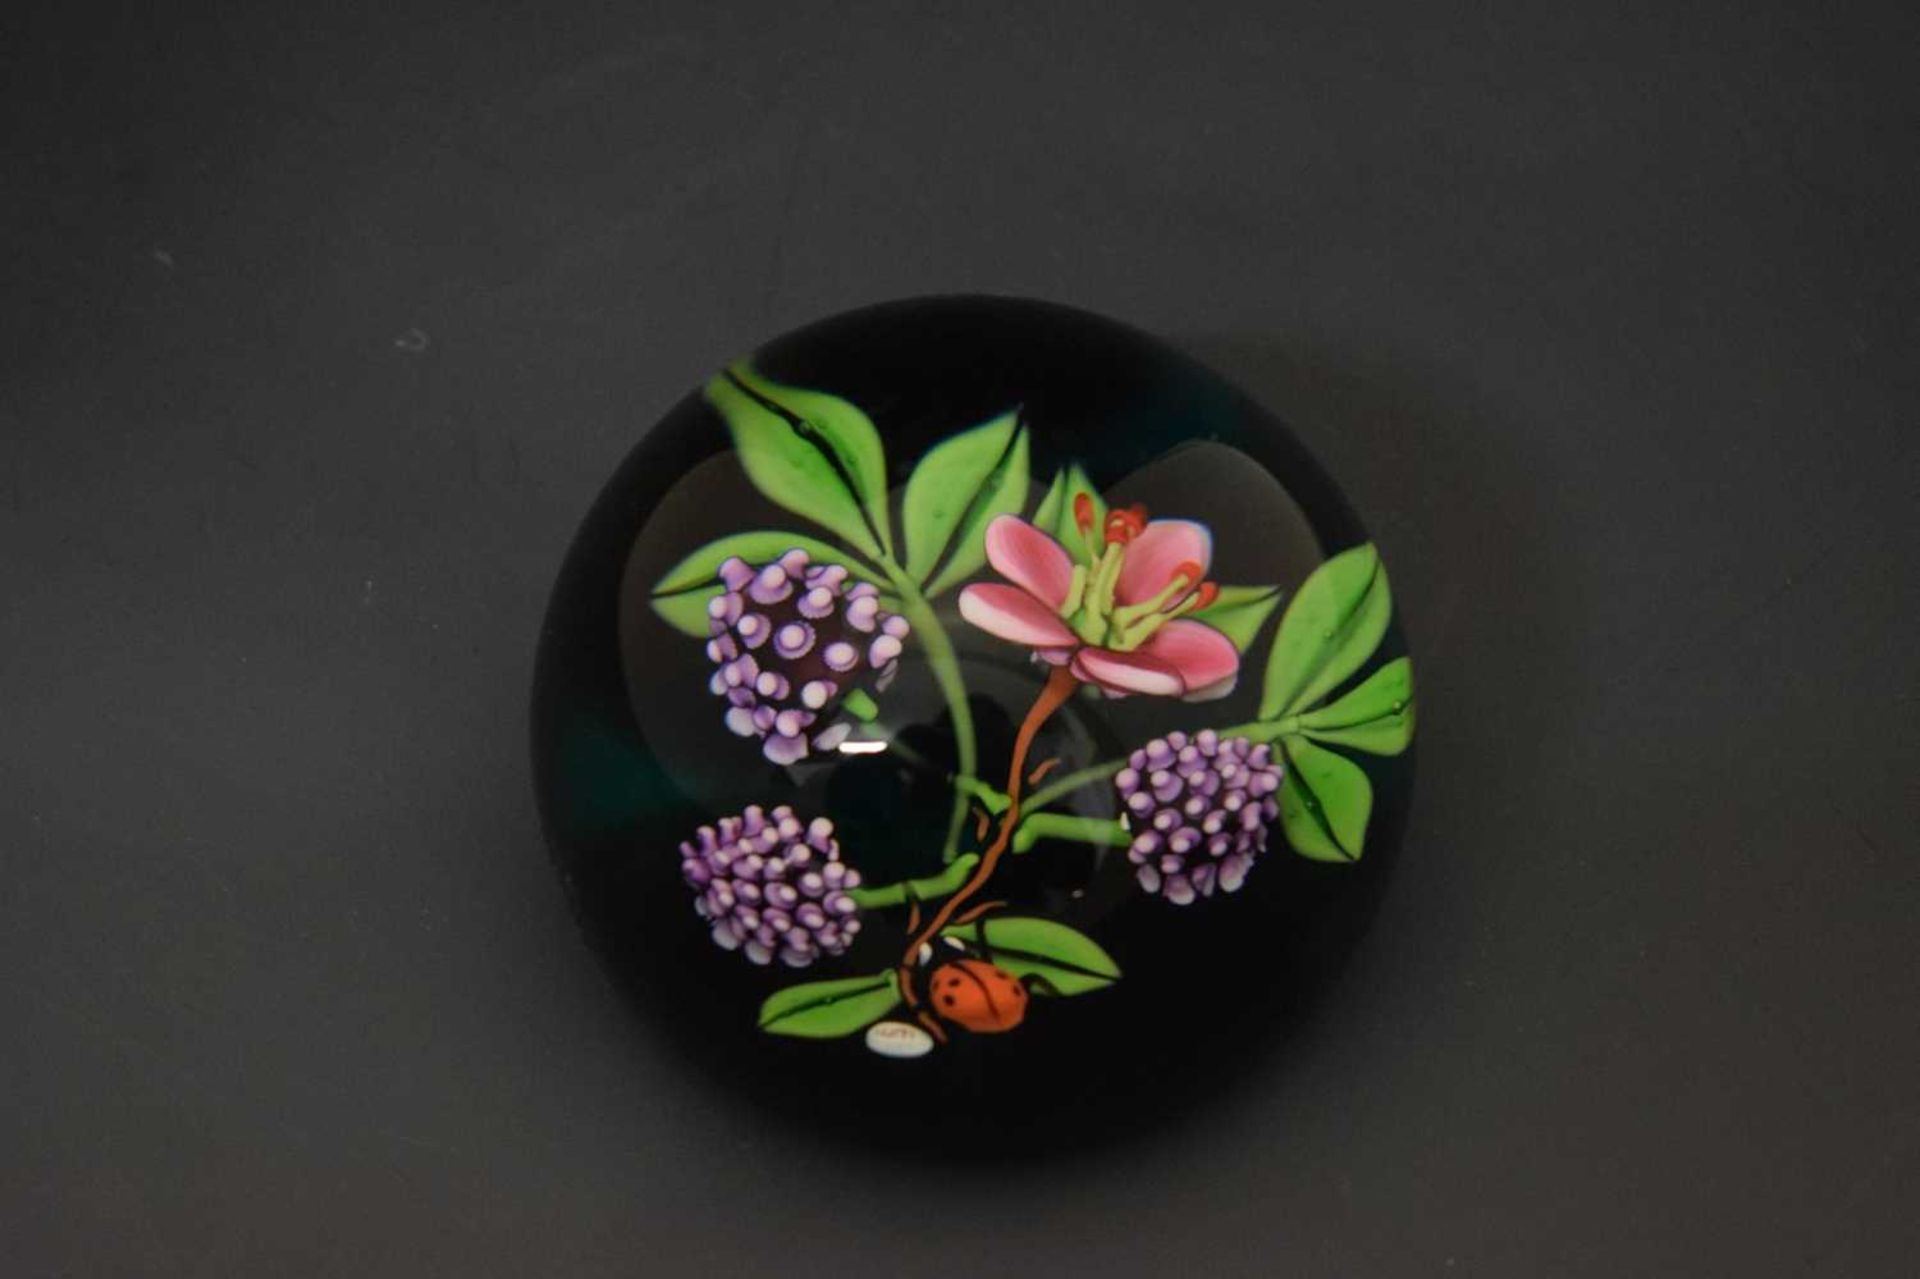 William Manson (Scottish) - Limited edition glass paperweight - Image 9 of 9